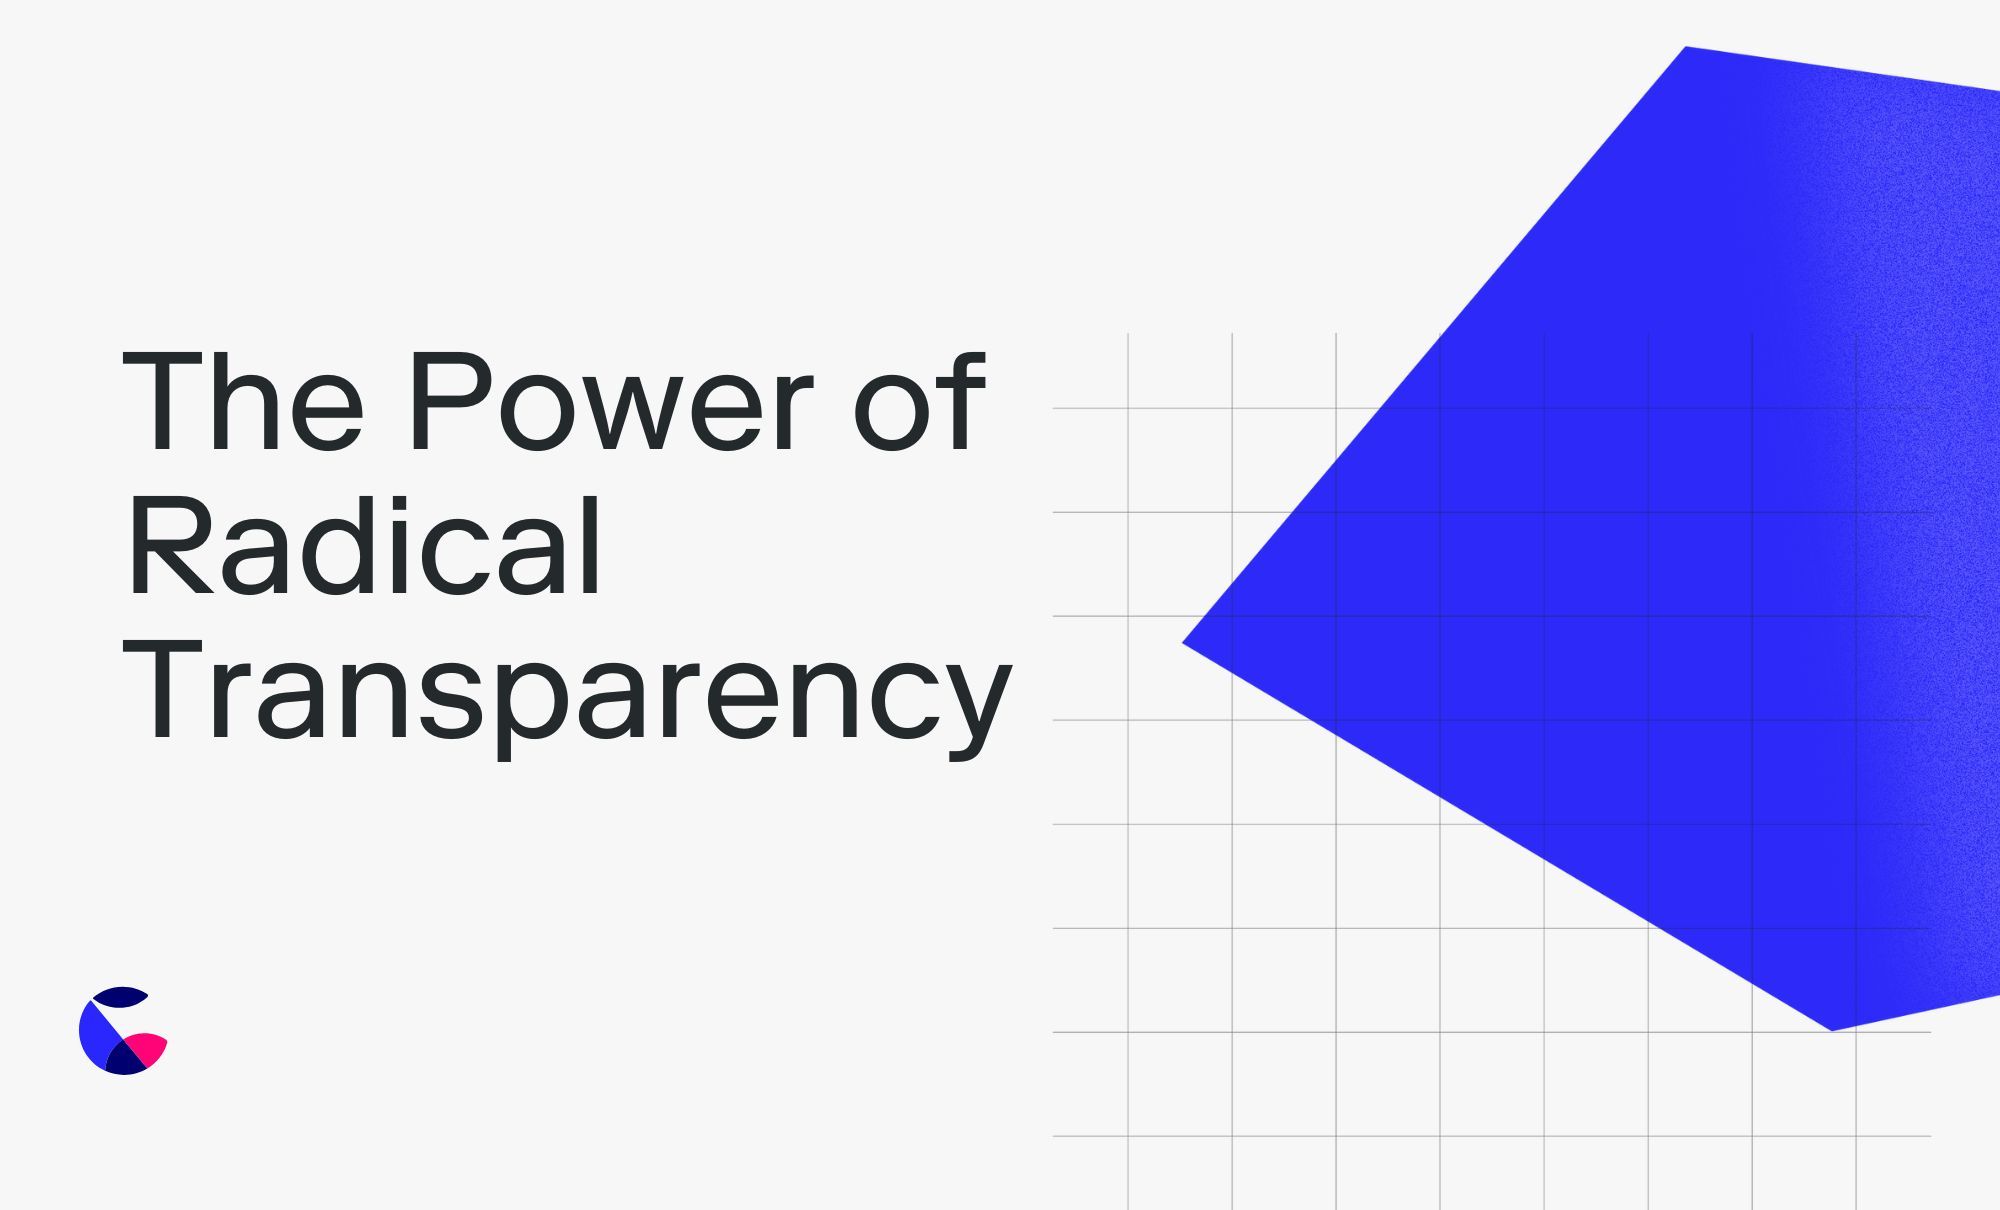 The Power of Radical Transparency